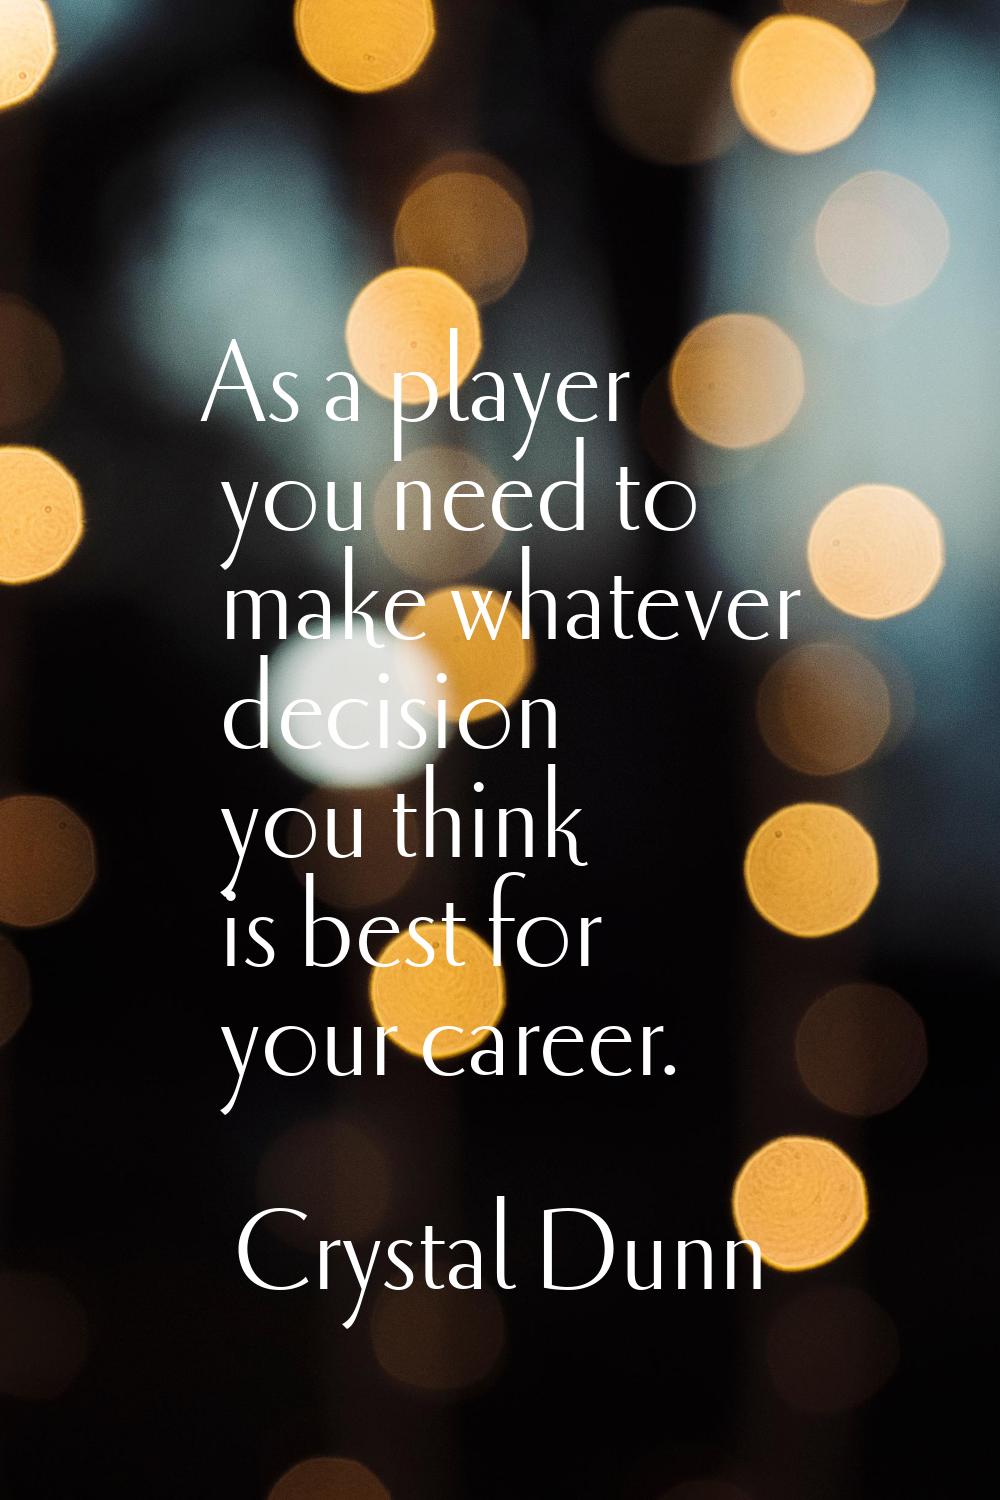 As a player you need to make whatever decision you think is best for your career.